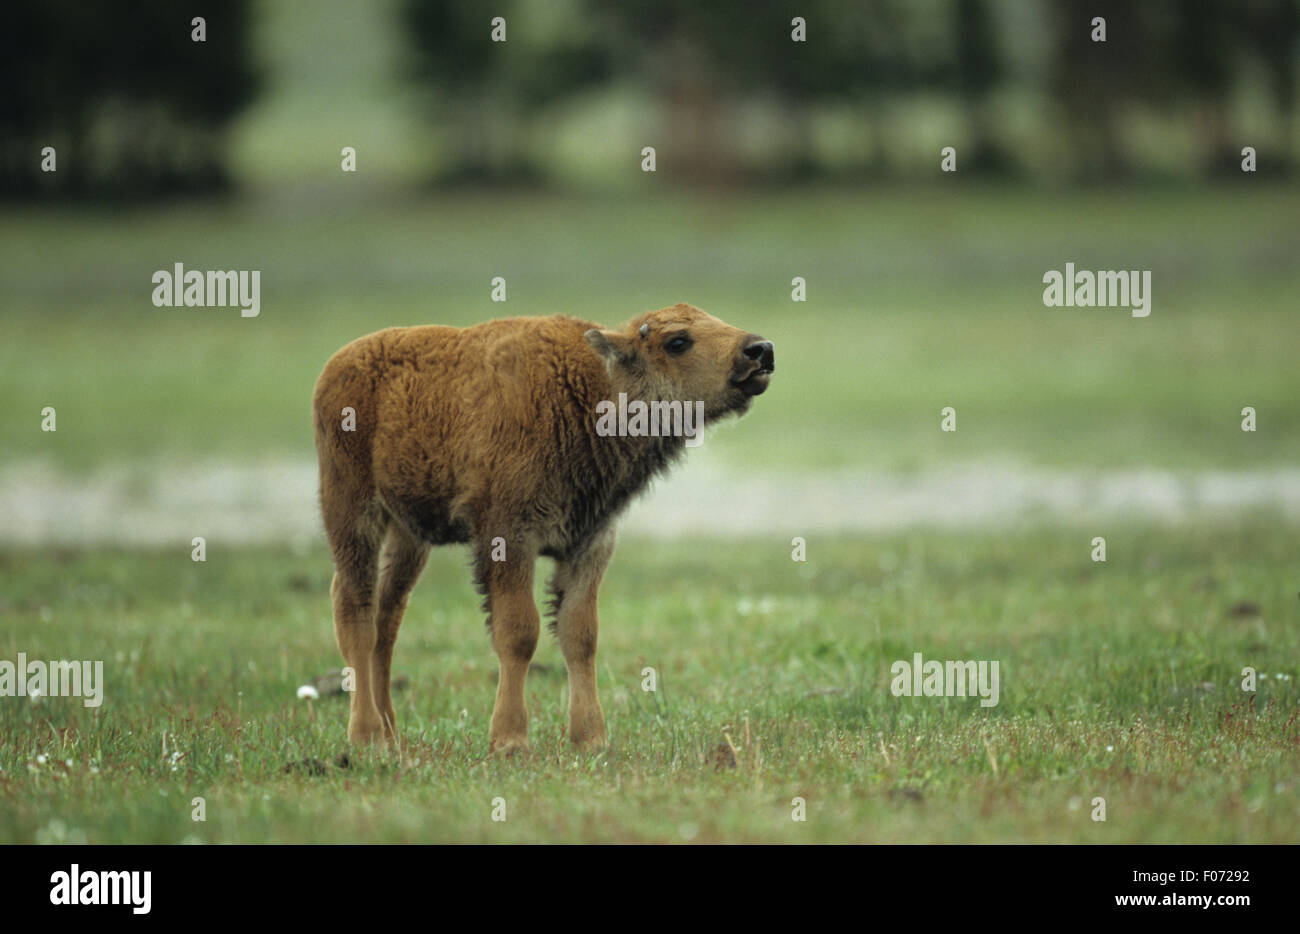 Bison young calf taken in profile looking right head up calling standing in open grassland Stock Photo